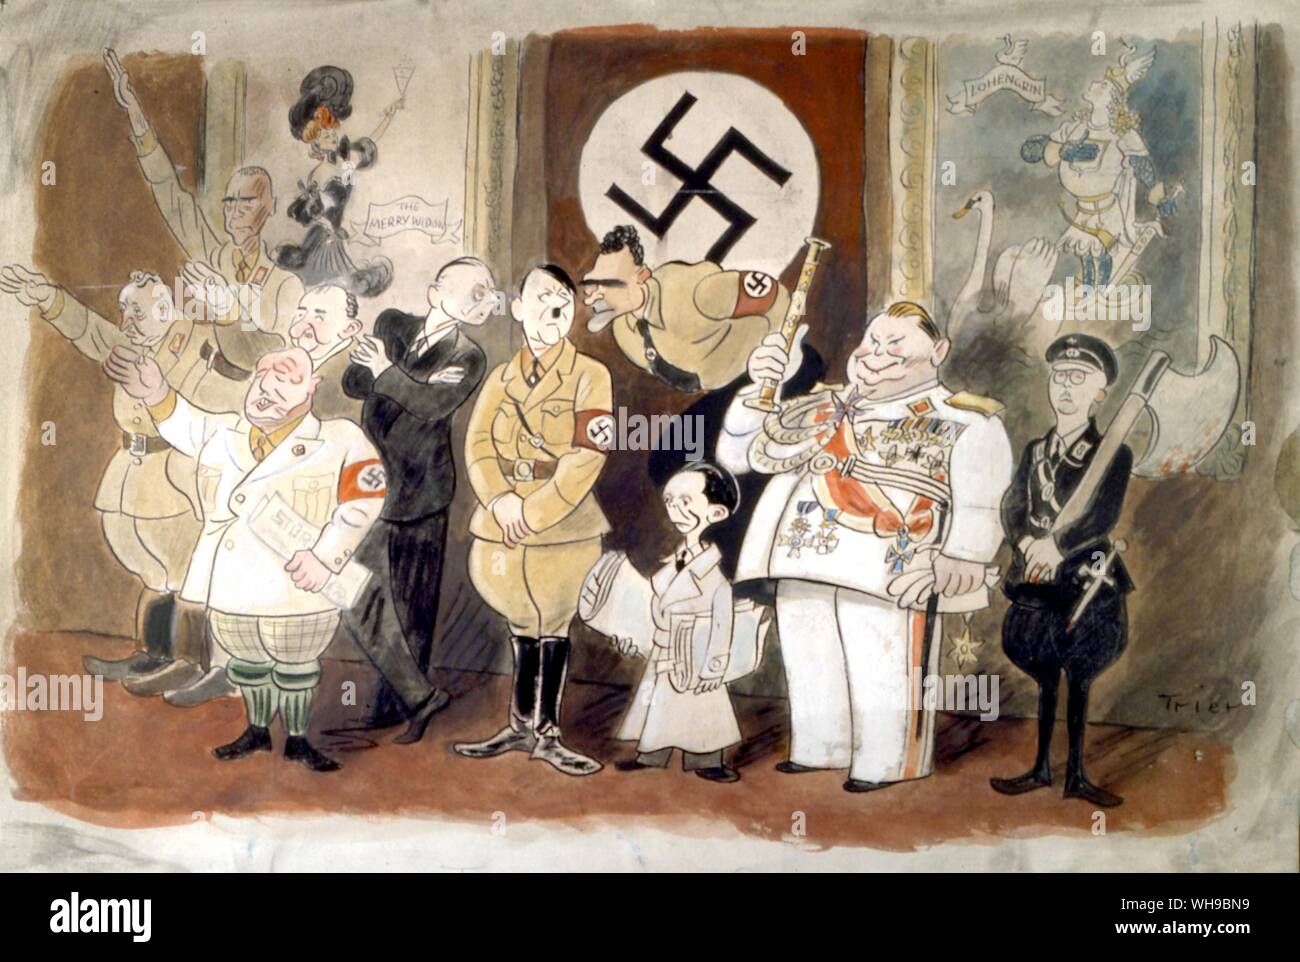 WW2/ Wartime cartoon illustration of Hitler, Mussolini and others. Stock Photo